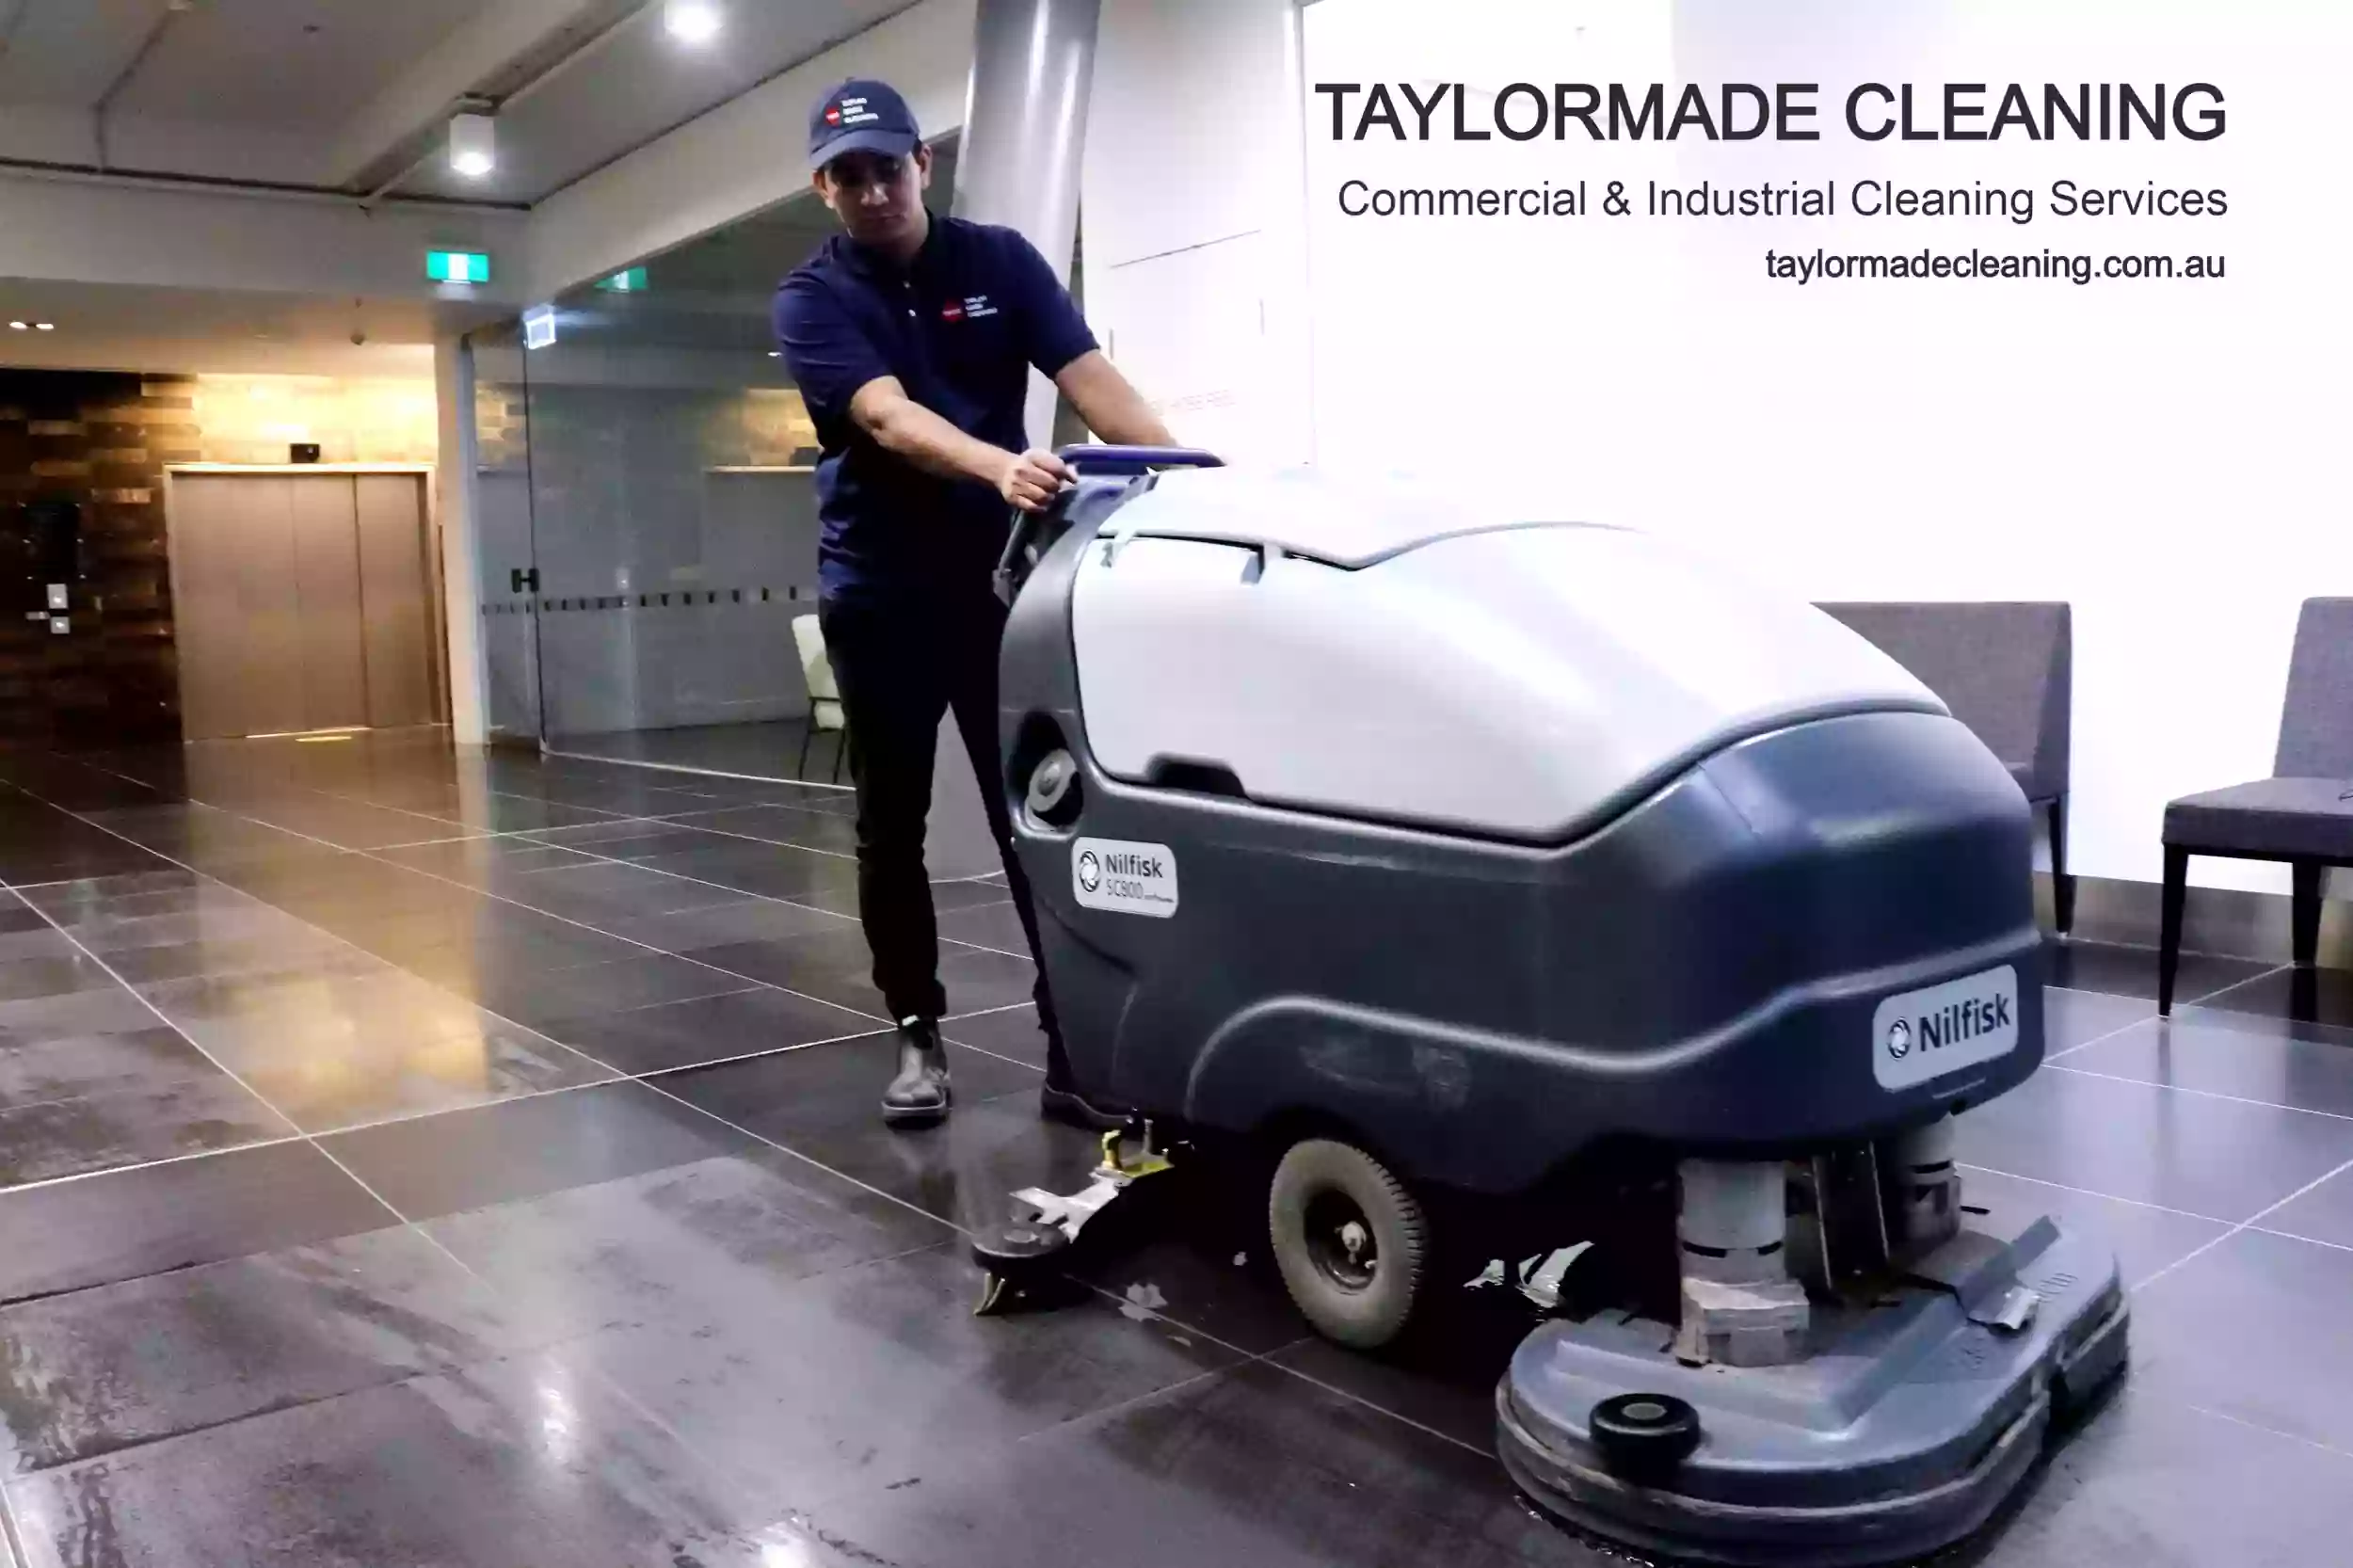 Taylormade Commercial Cleaning Services